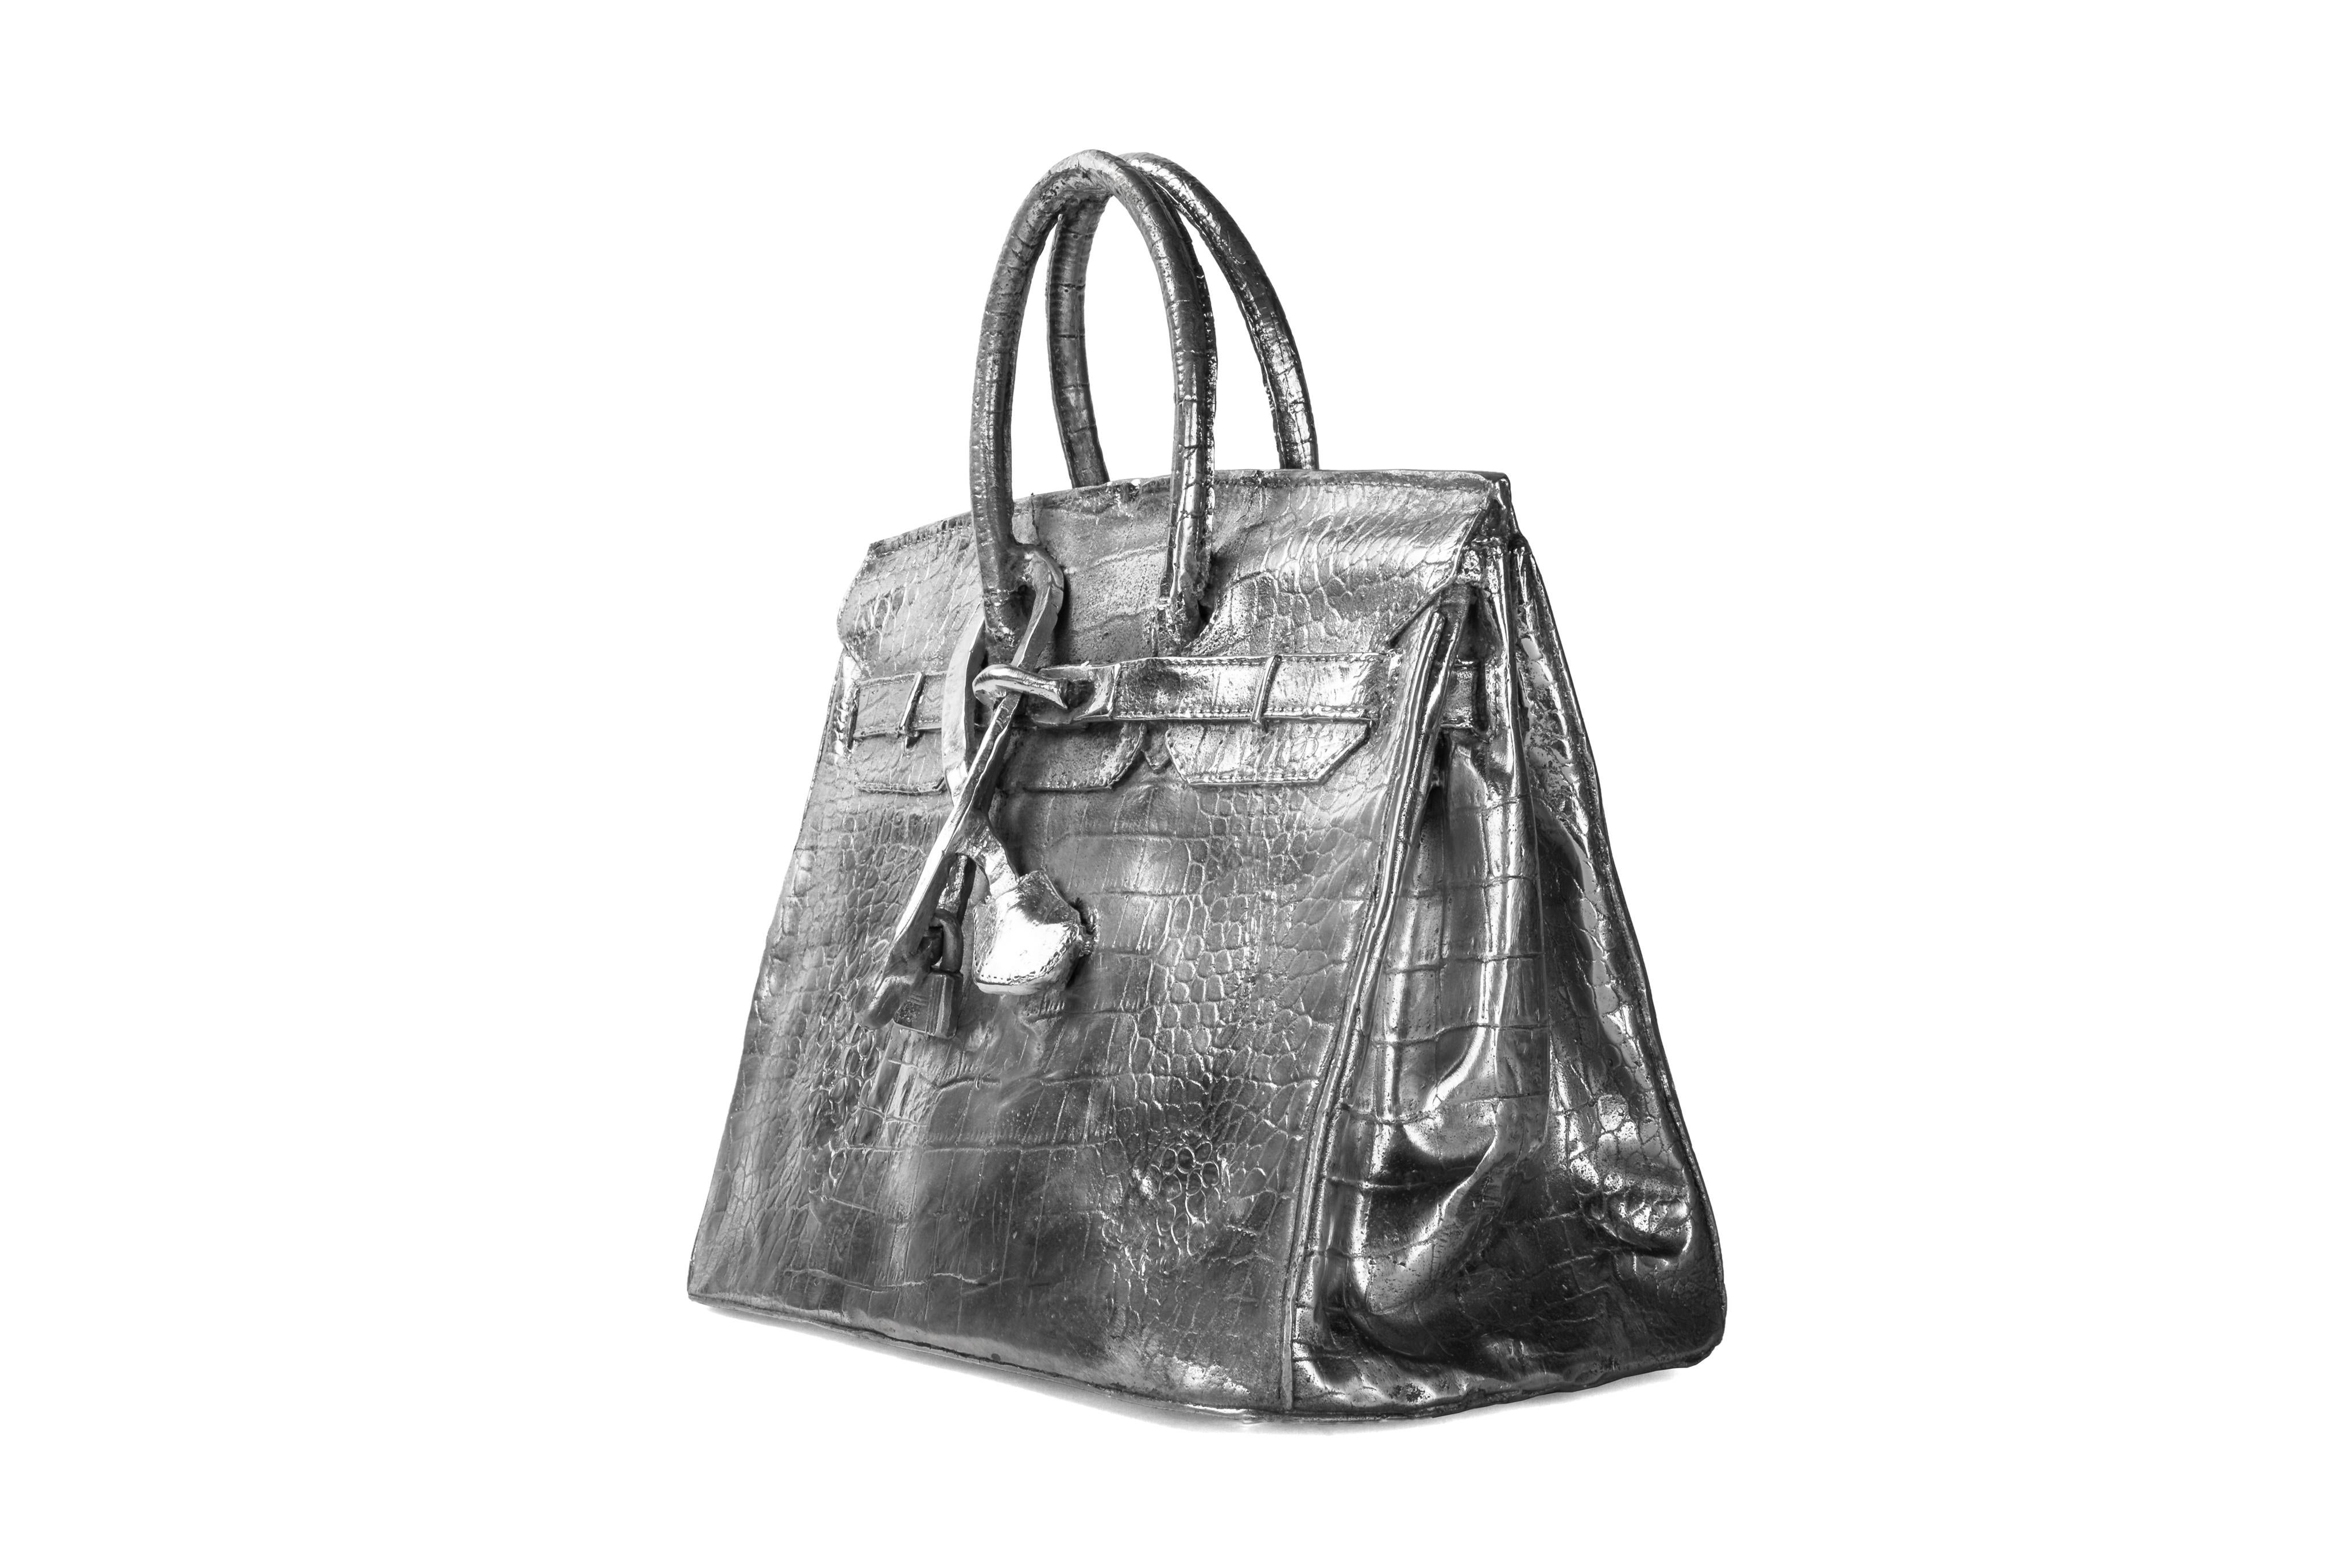 A wild and fantastic sculpture. An artist casted a Hermes birkin bag out of aluminum. The results are a vividly real bag, but about 20lbs heavier. Truly a cherry on top for a Hermes bag enthusiast.